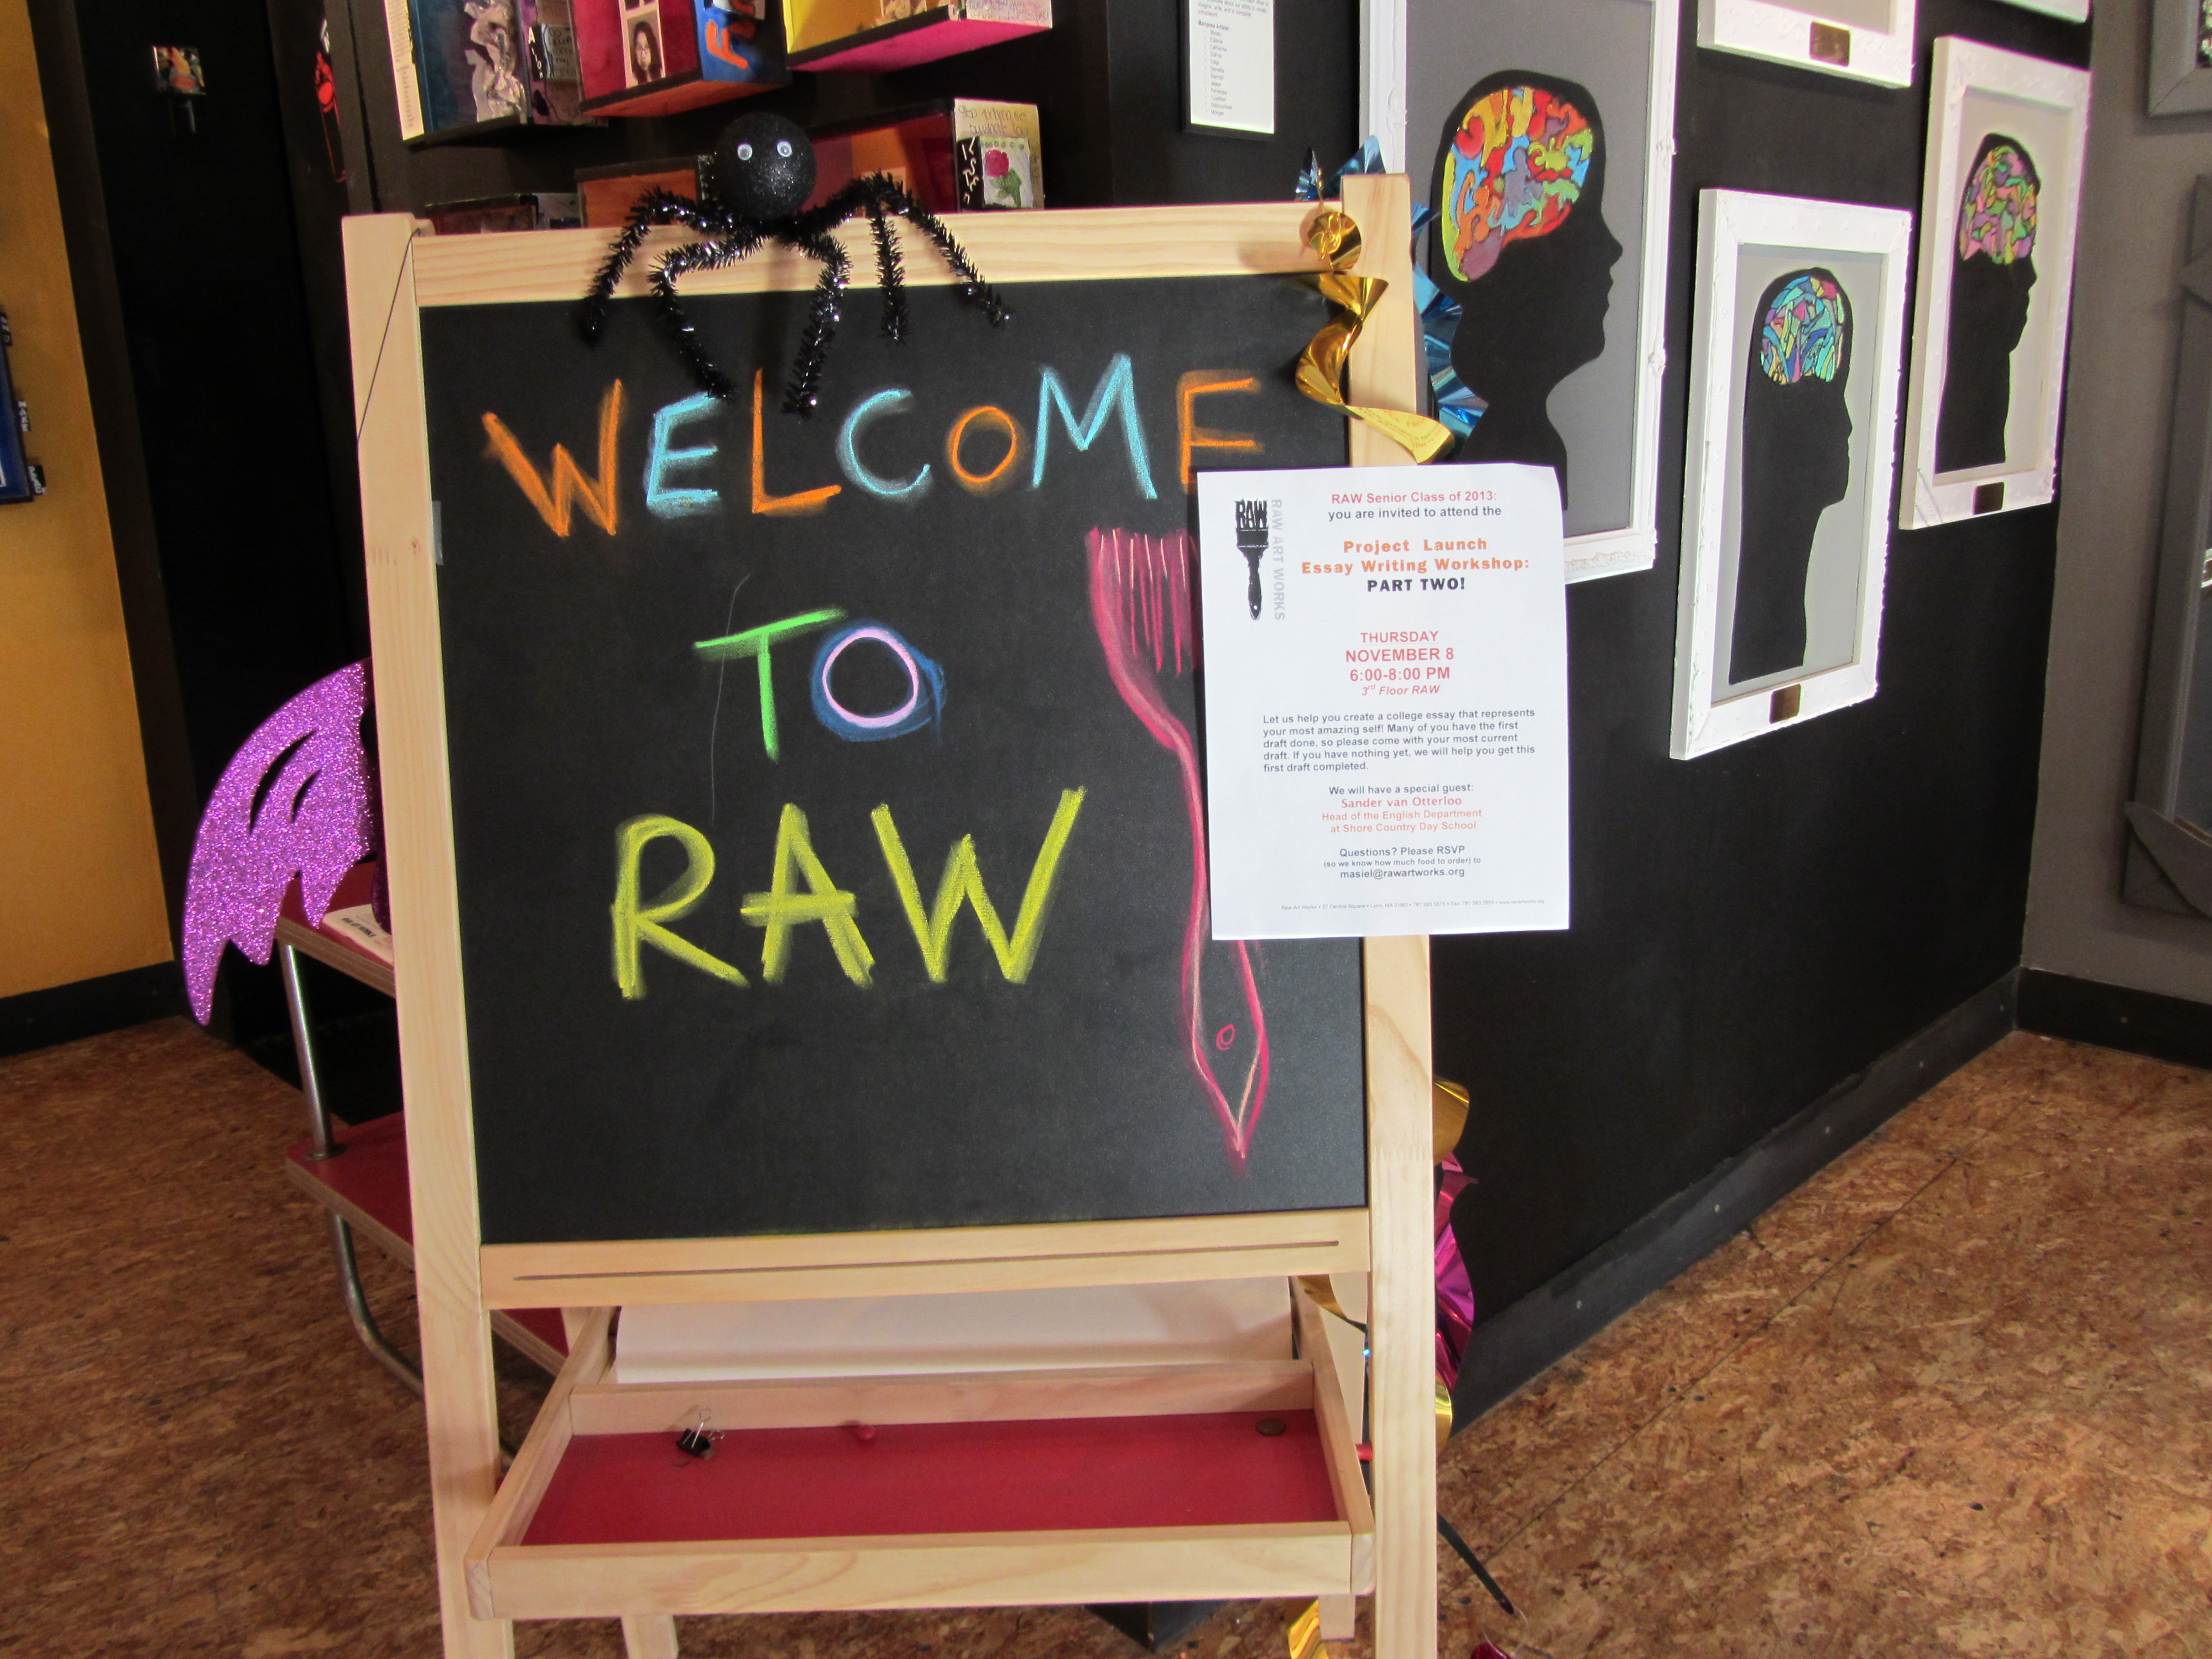 Welcome to RAW, photo by MAPC, November 2012